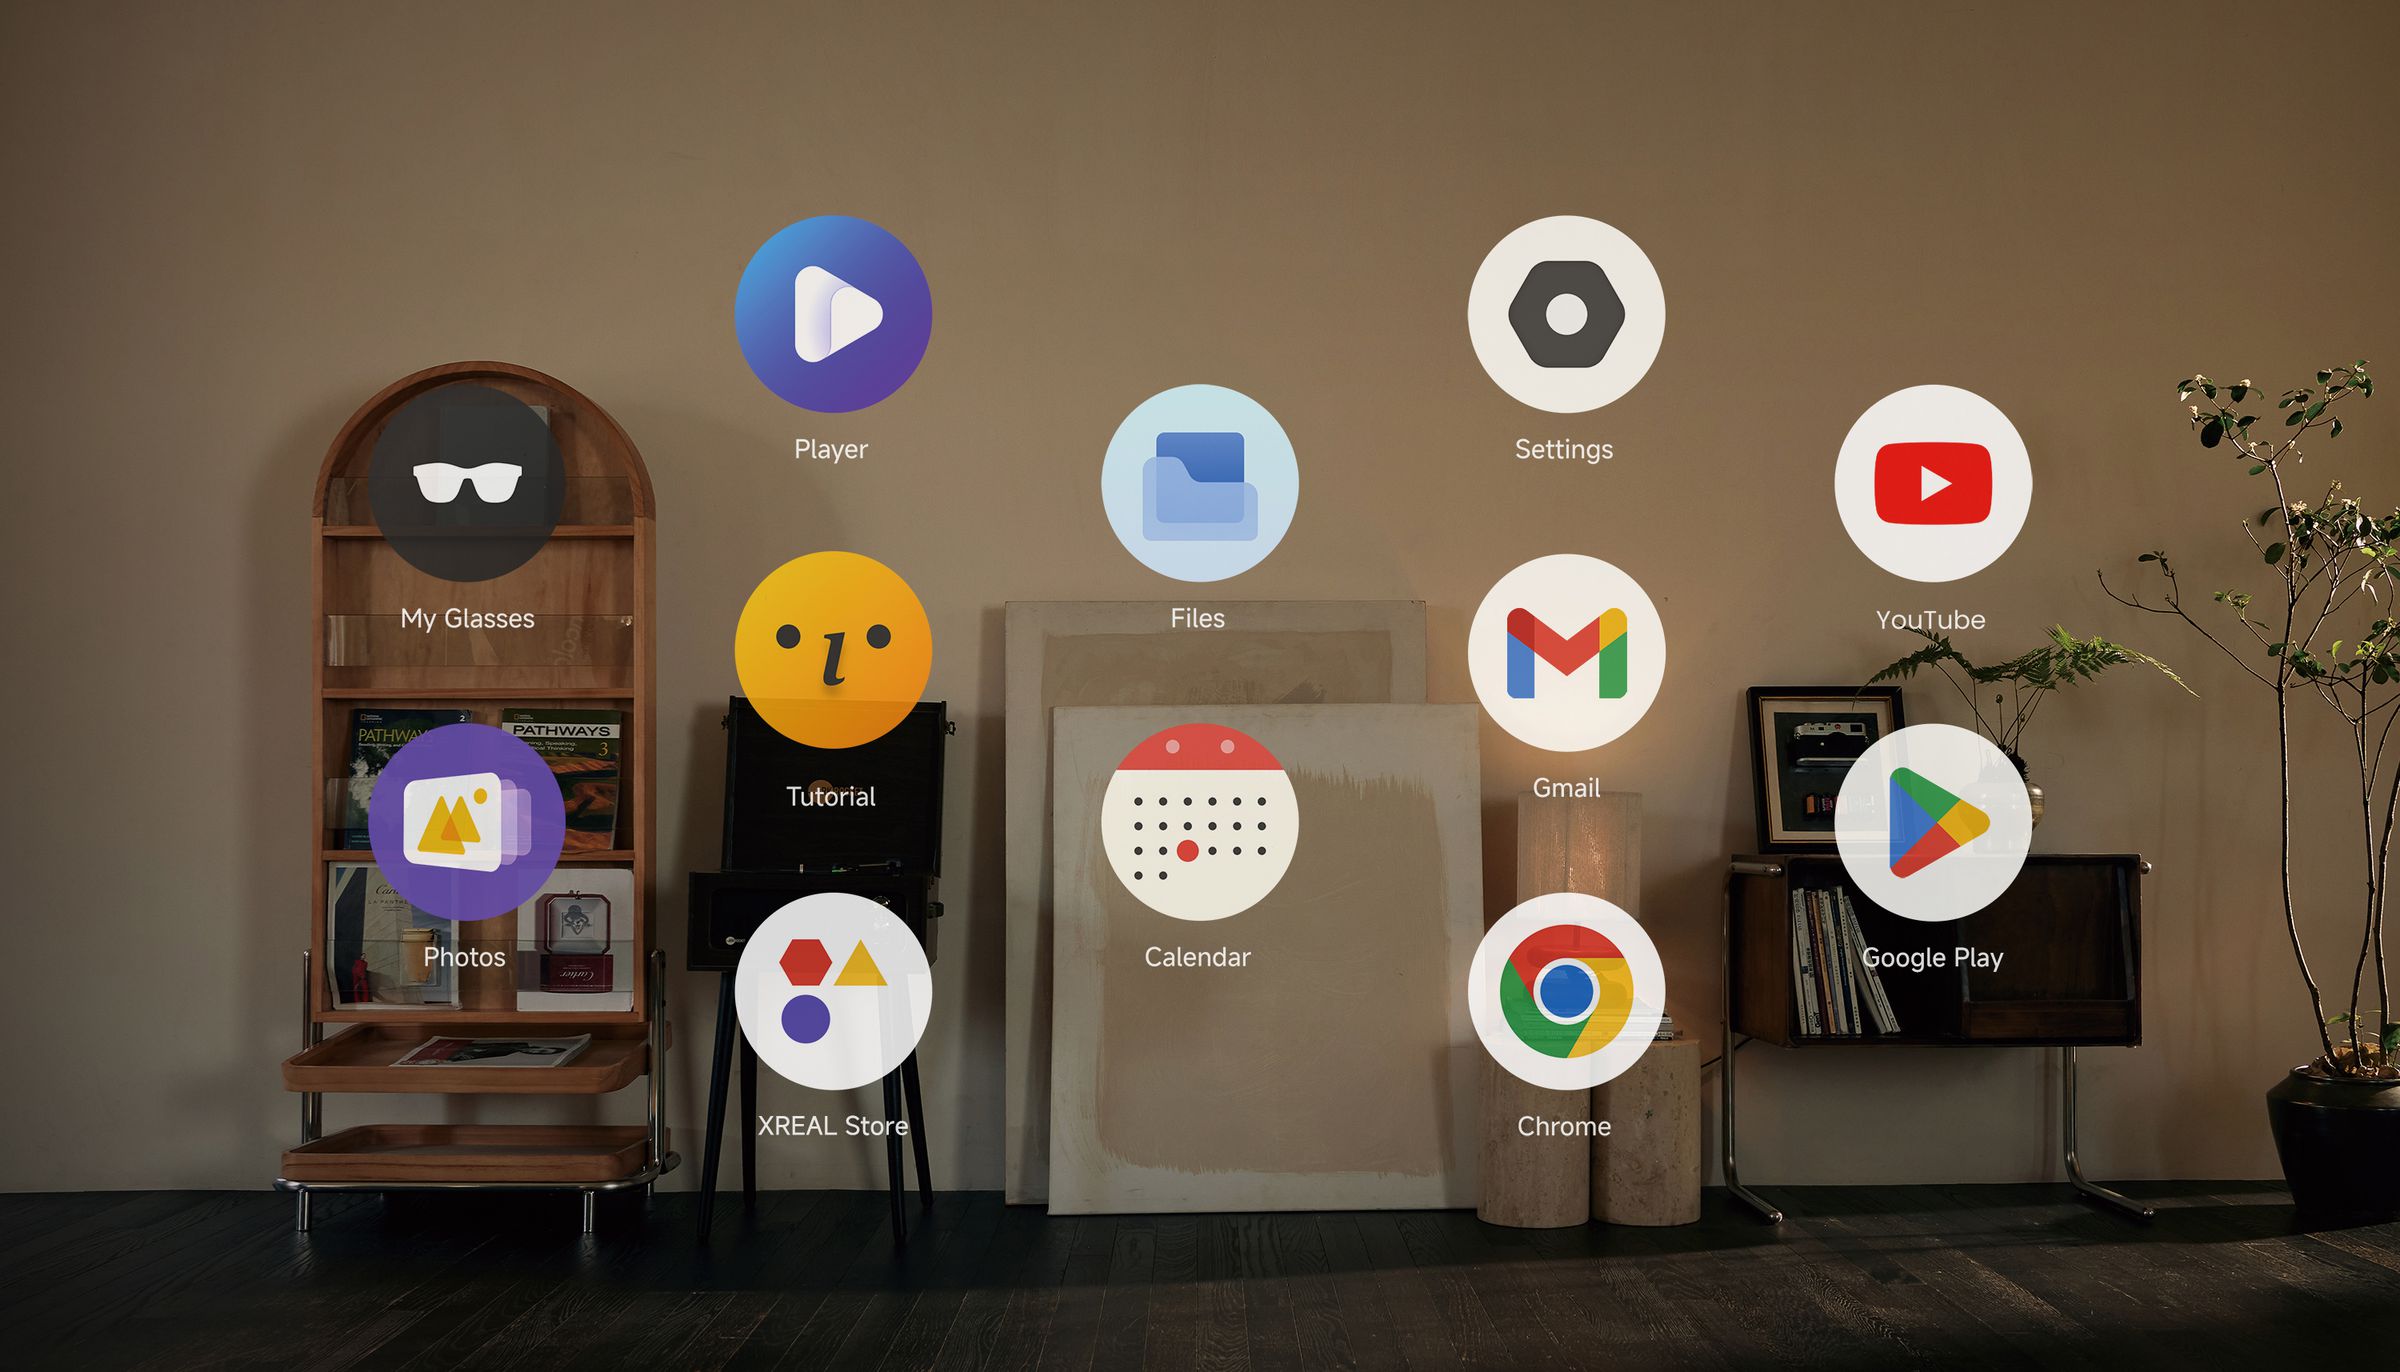 An image of app icons floating above a living room.